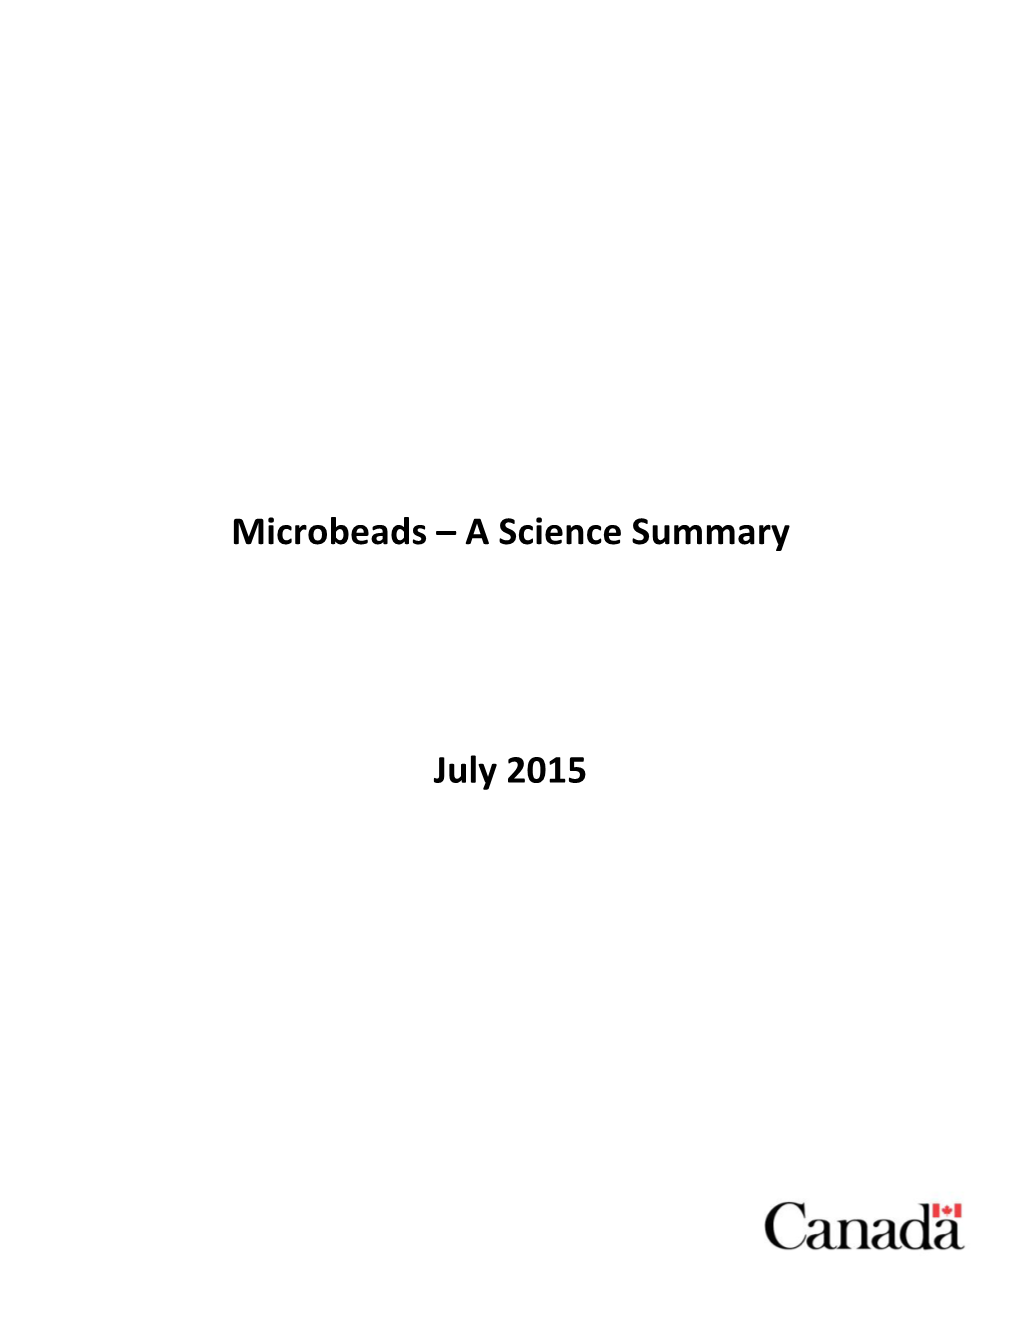 Microbeads – a Science Summary July 2015